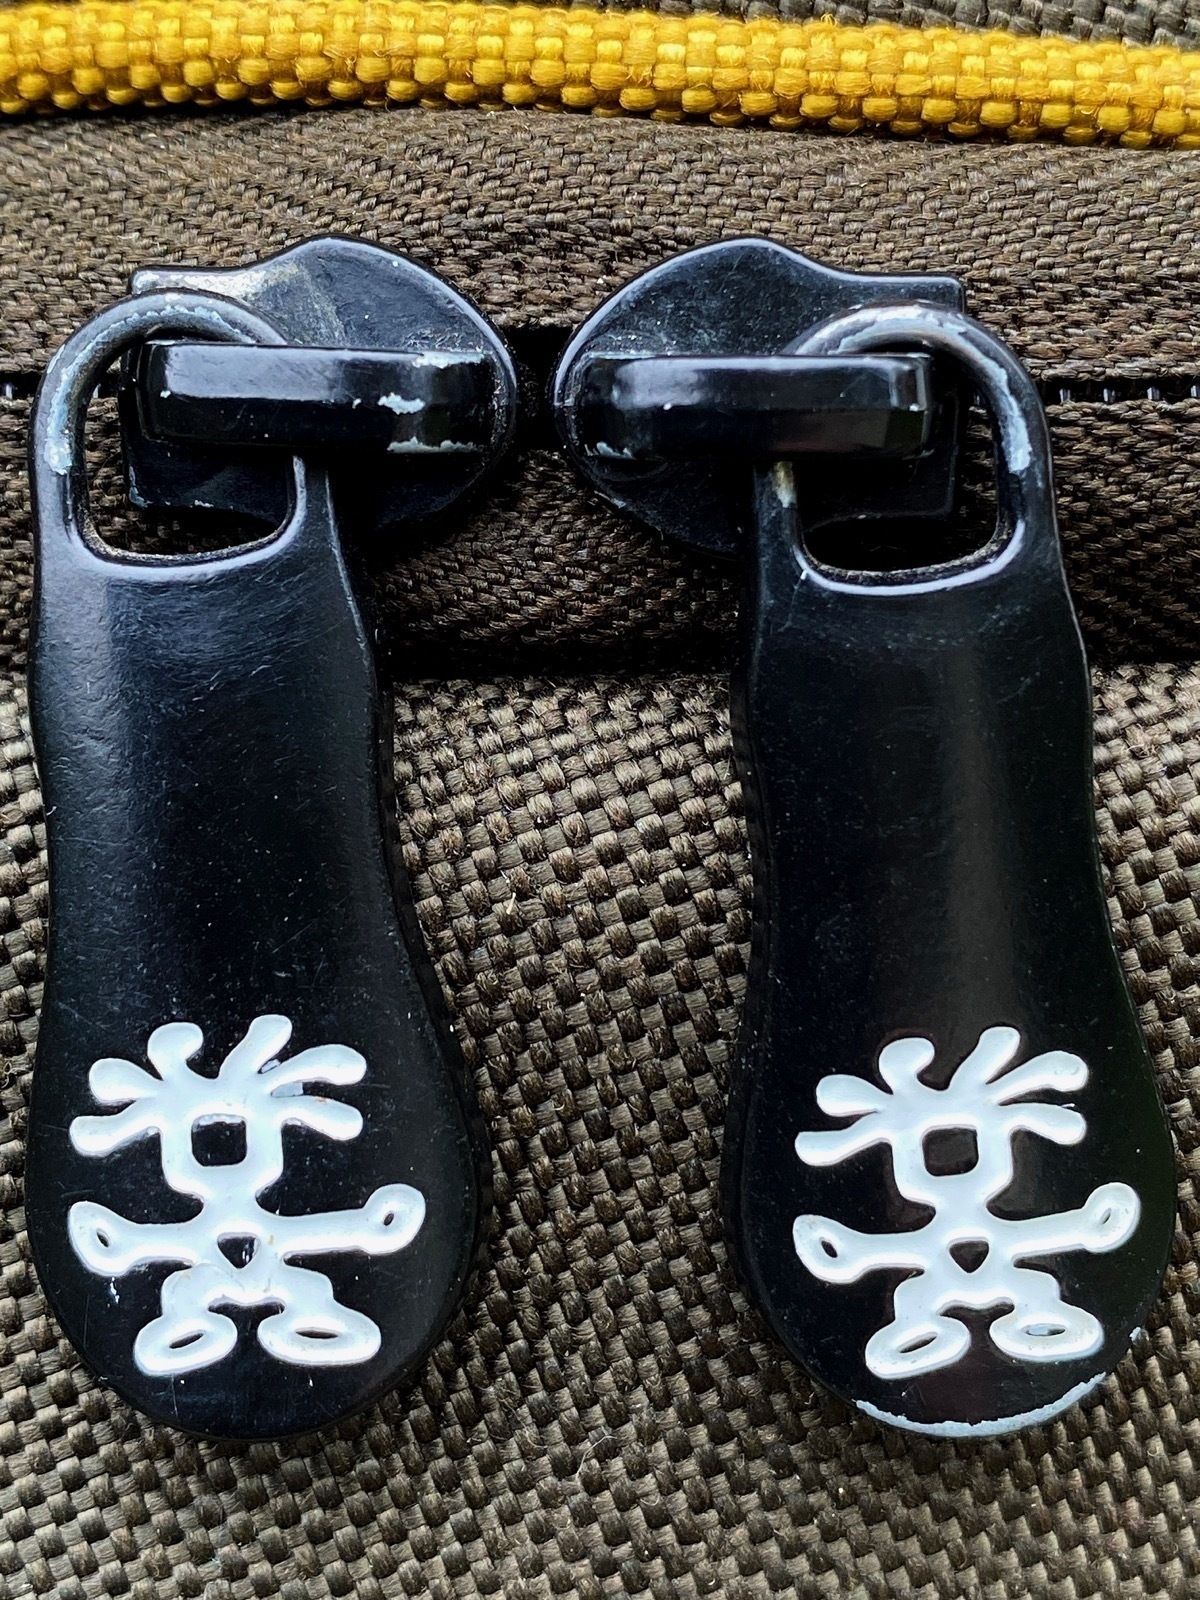 Close up of a zip and two black zip fasteners with white stick figures painted on them